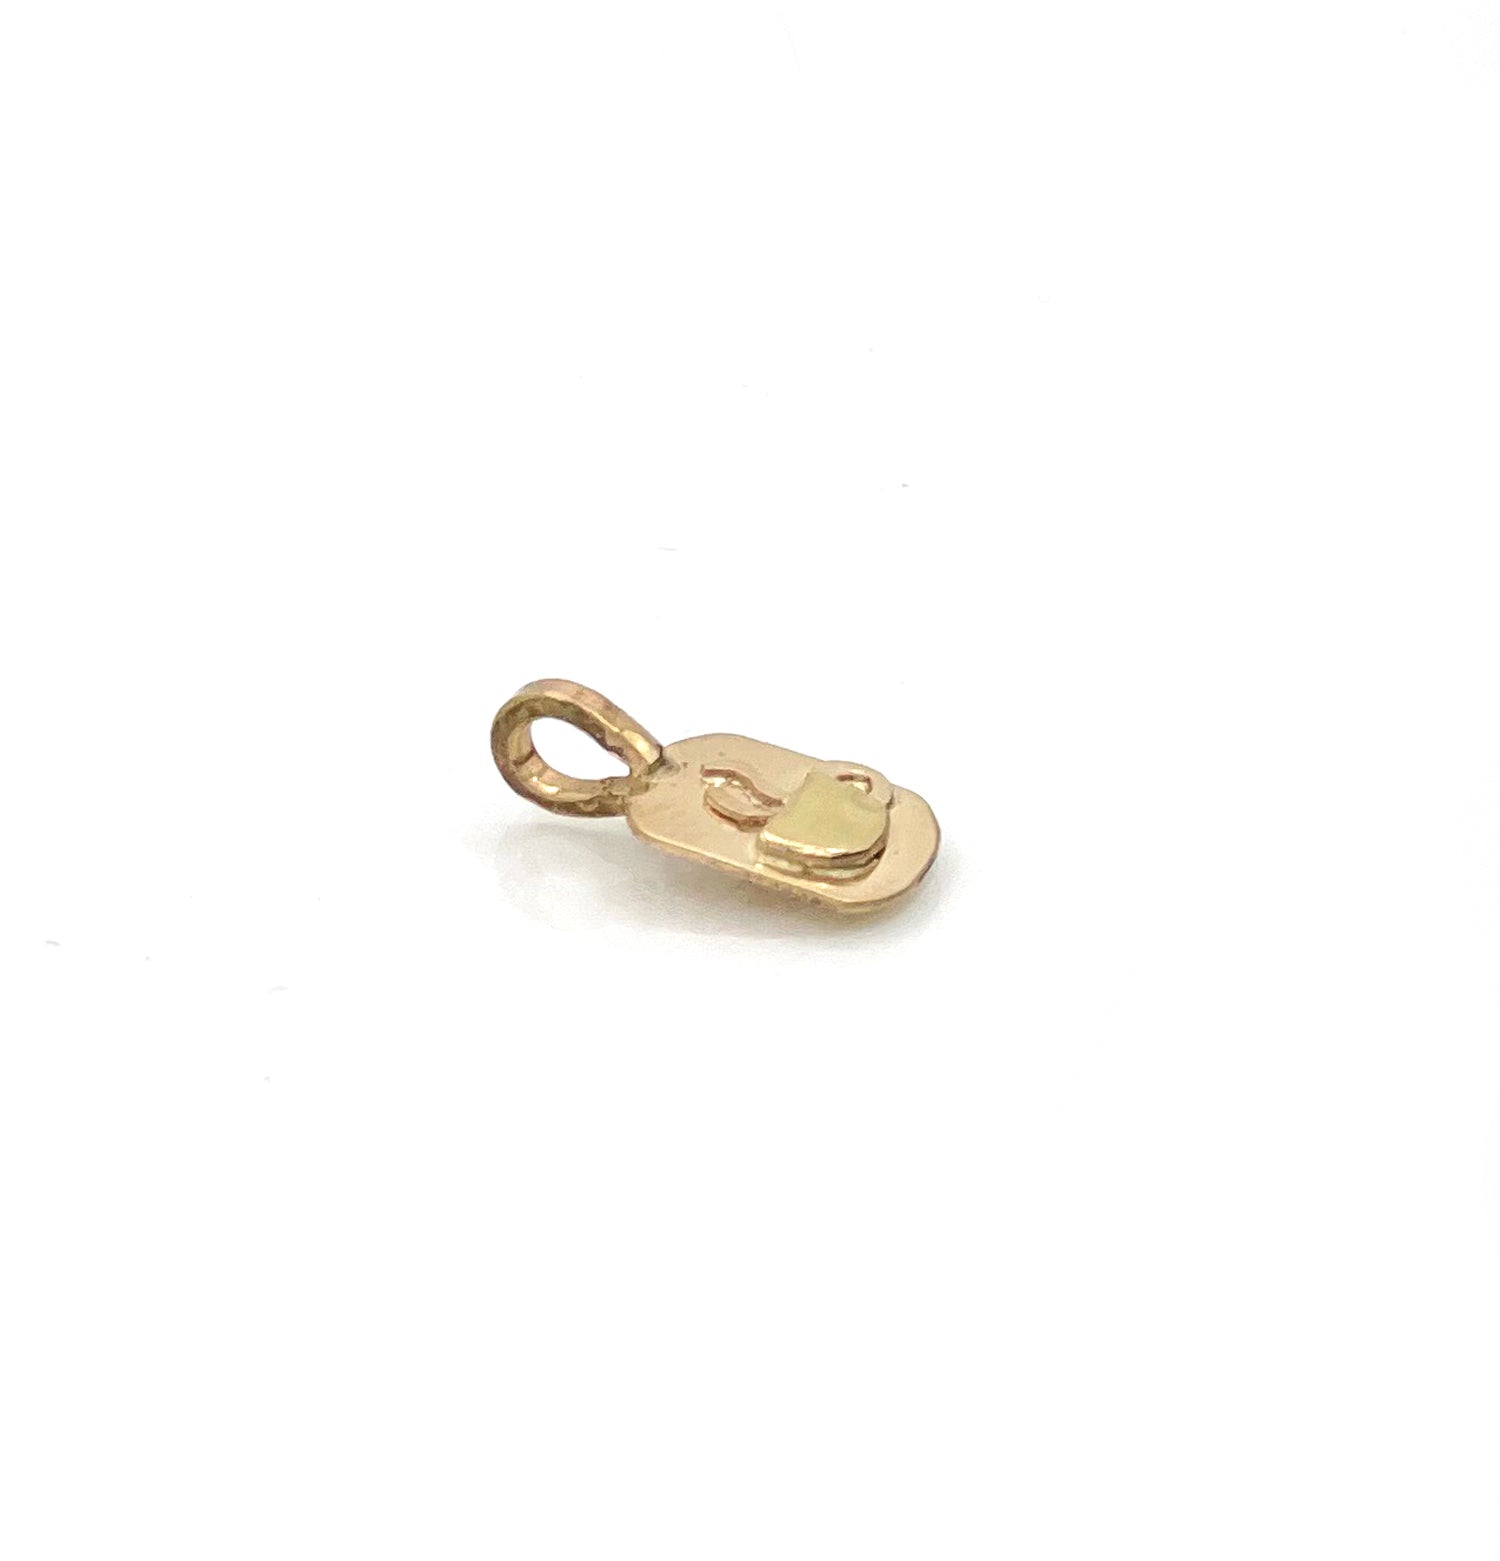 14K Coffee Cup Charm, Solid Gold Coffee Dog Tag Charm, One of a Kind